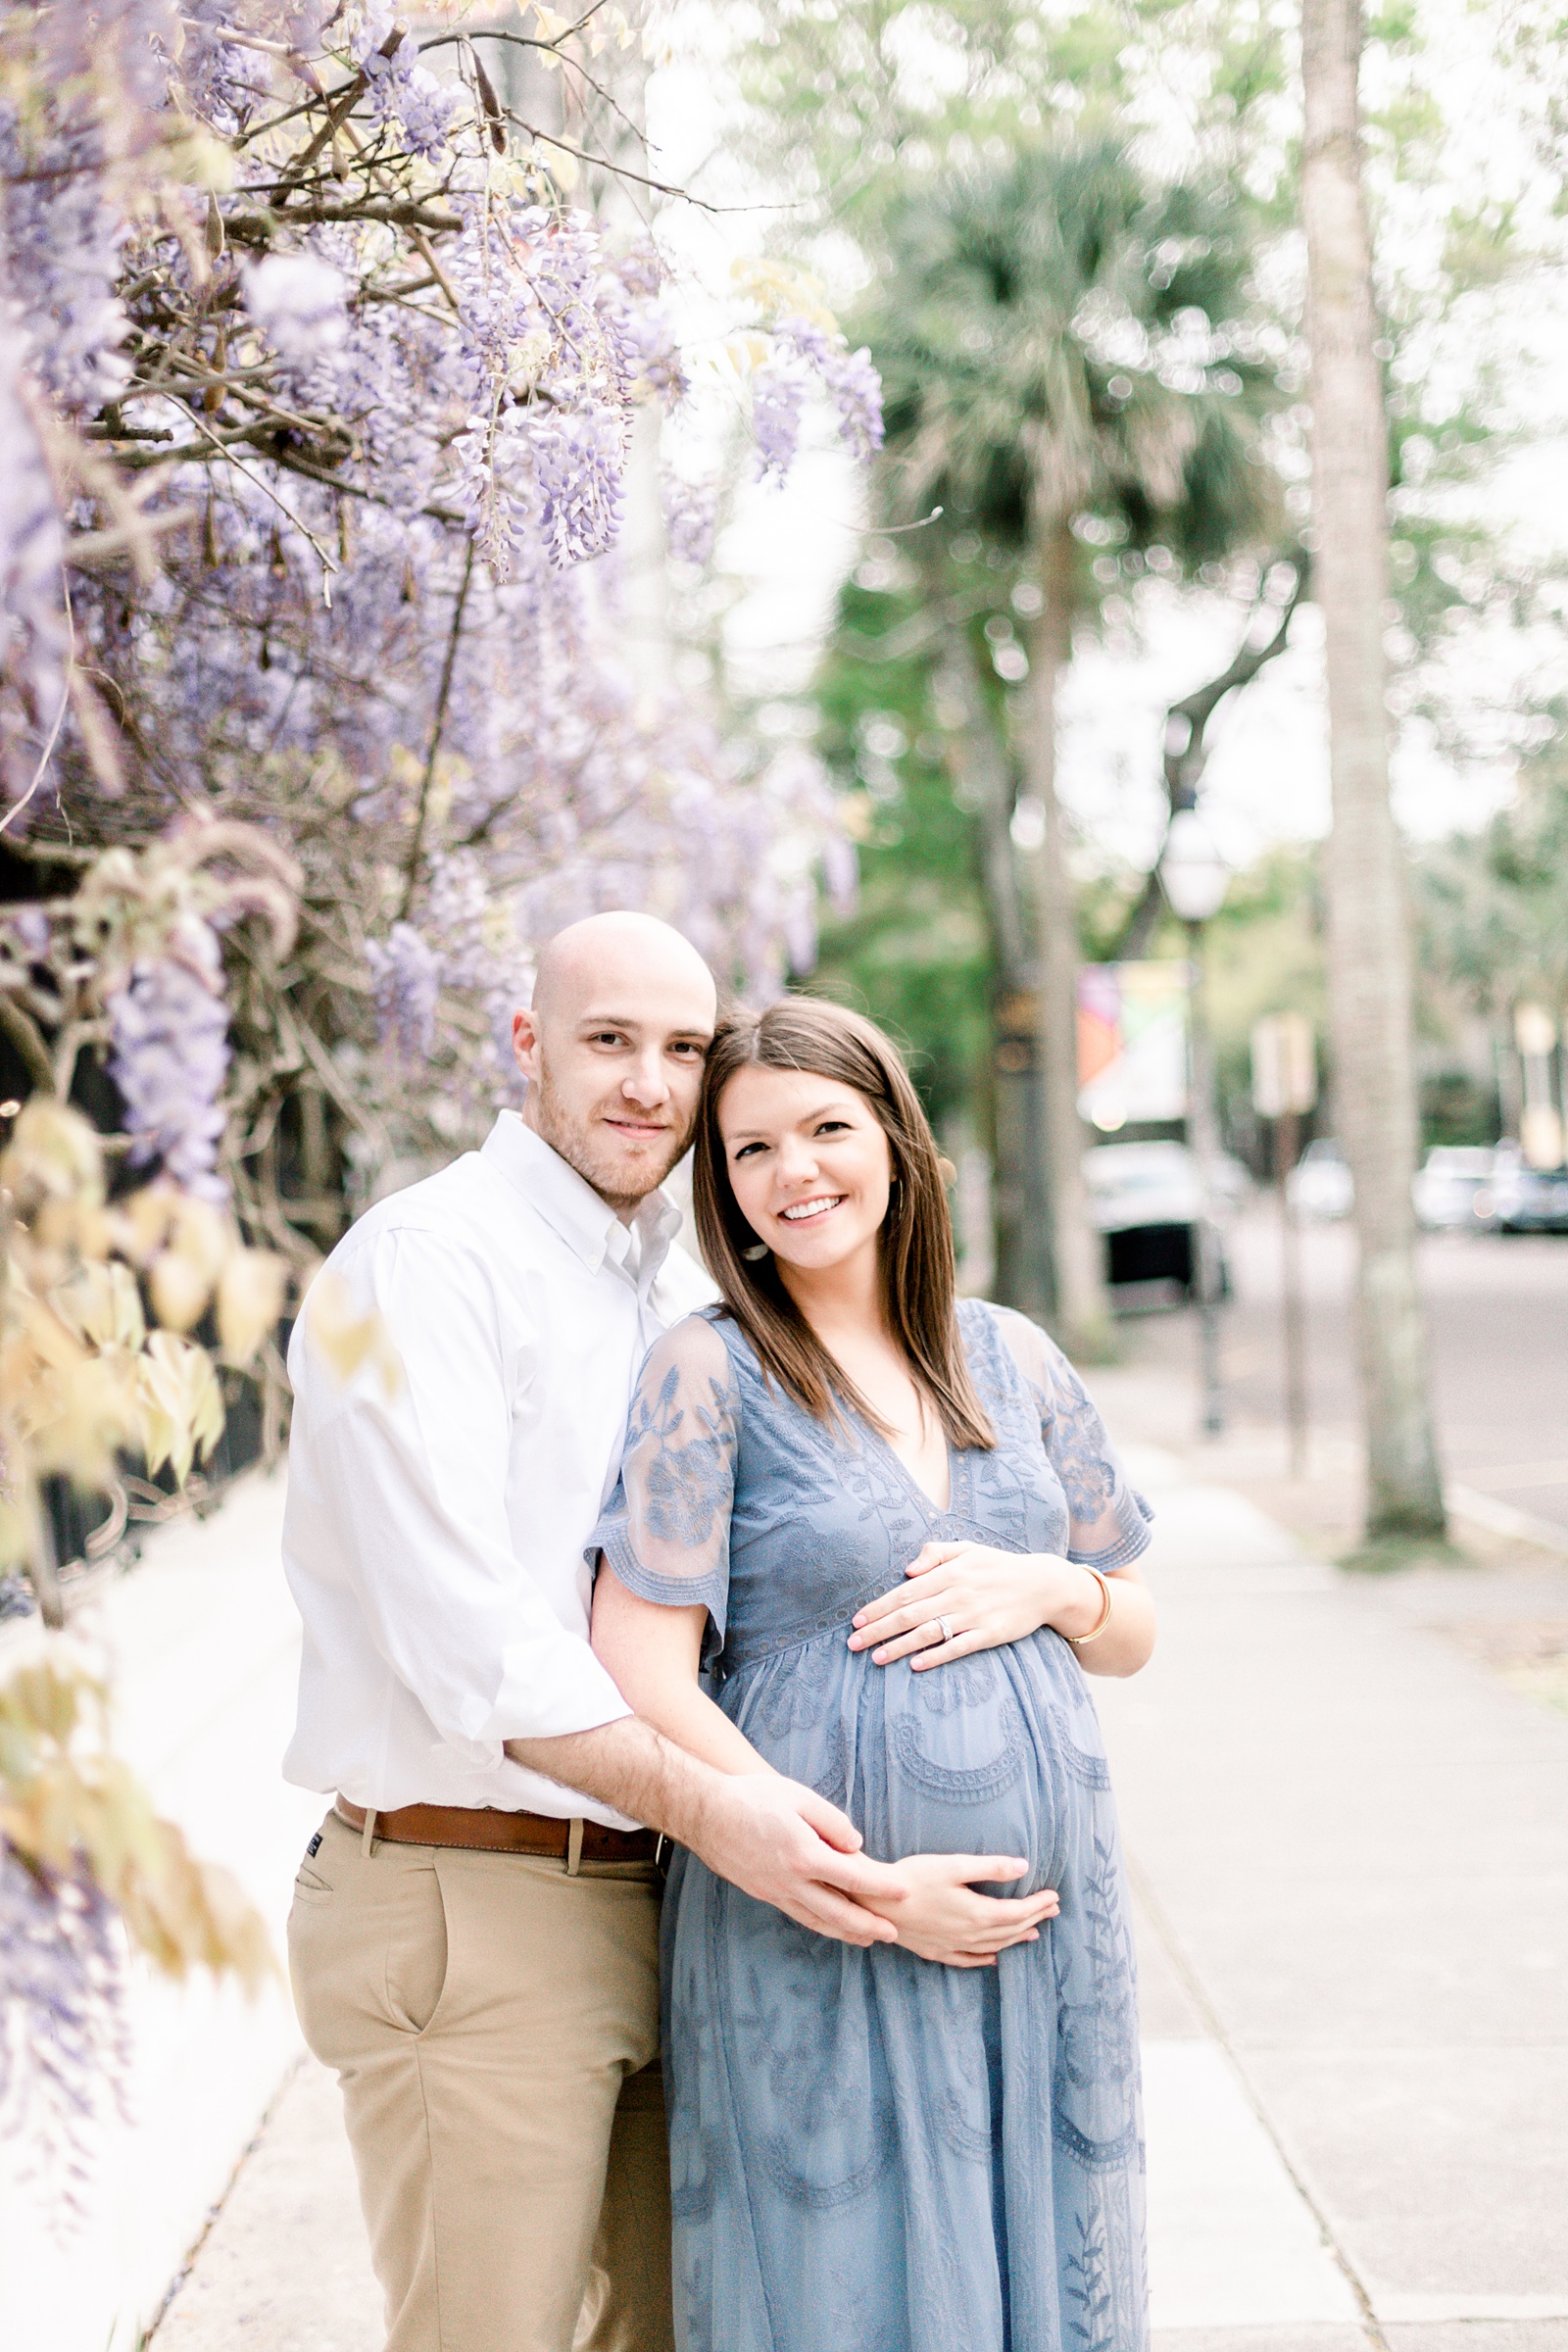 Spring maternity session among the wisteria in Charleston, SC by Caitlyn Motycka Photography